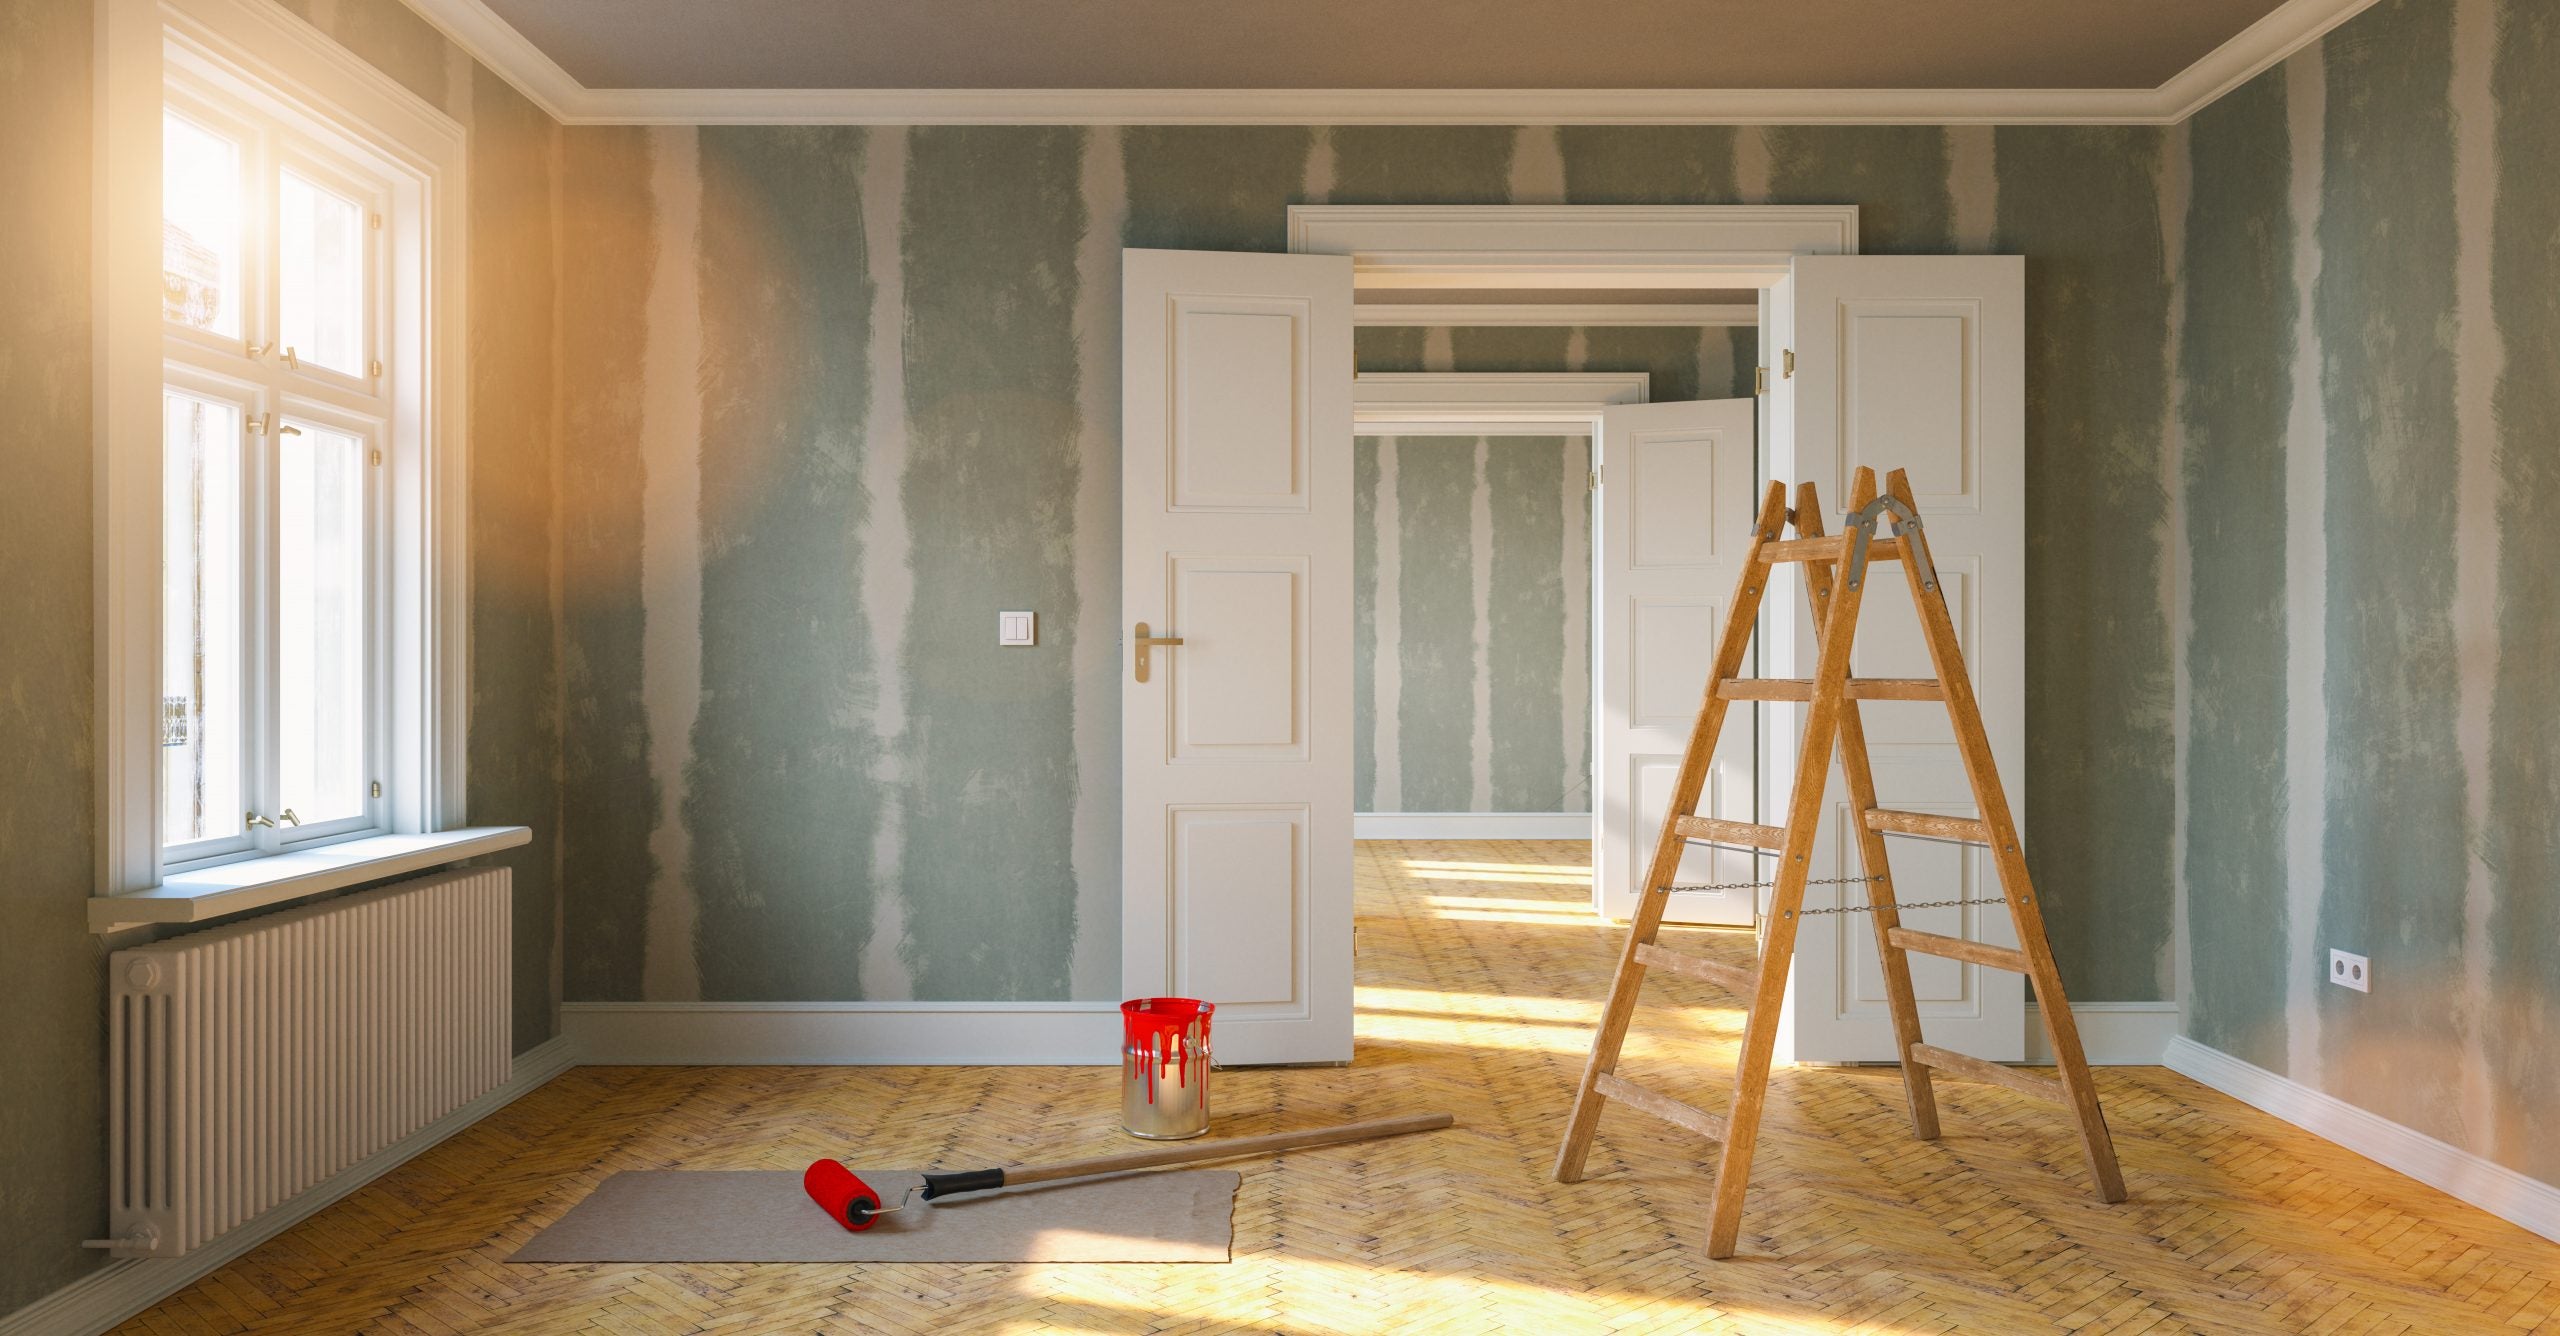 Room,In,Renovation,In,Elegant,Apartment,For,Relocation,With,Paint